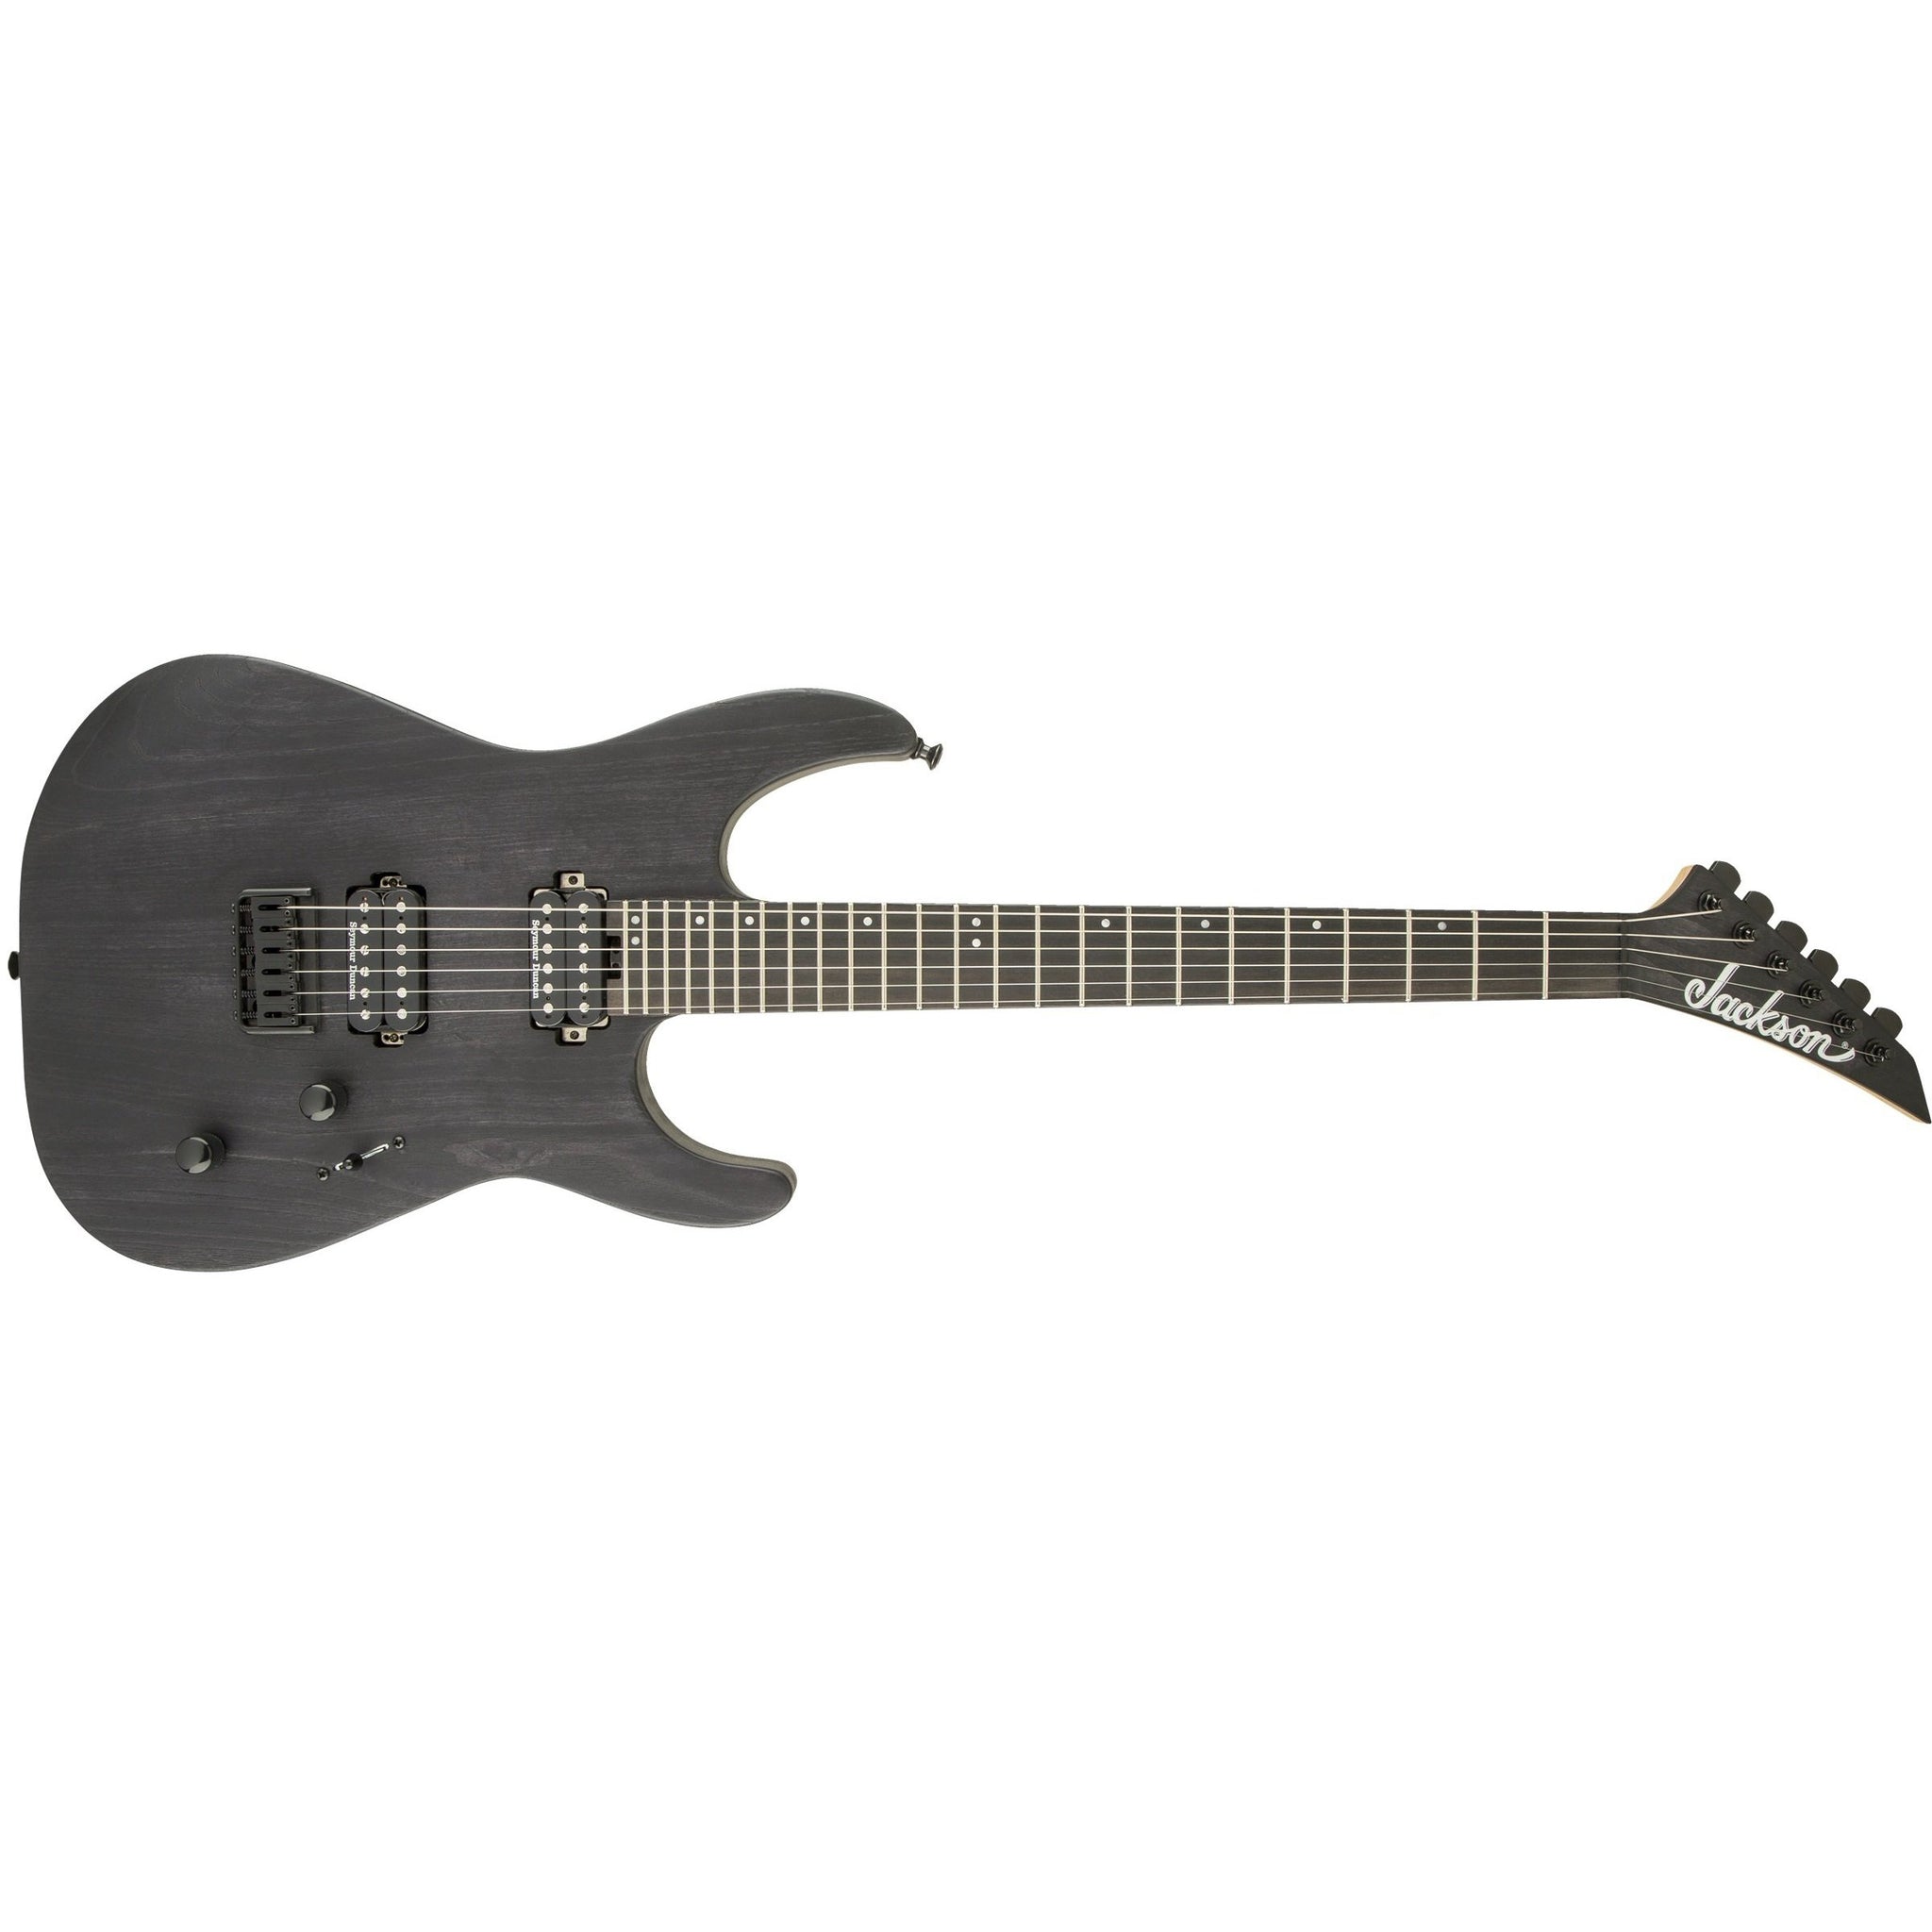 Jackson Pro Series Dinky DK2 Ash Electric Guitar-Charcoal Grey (Discontinued)-Music World Academy